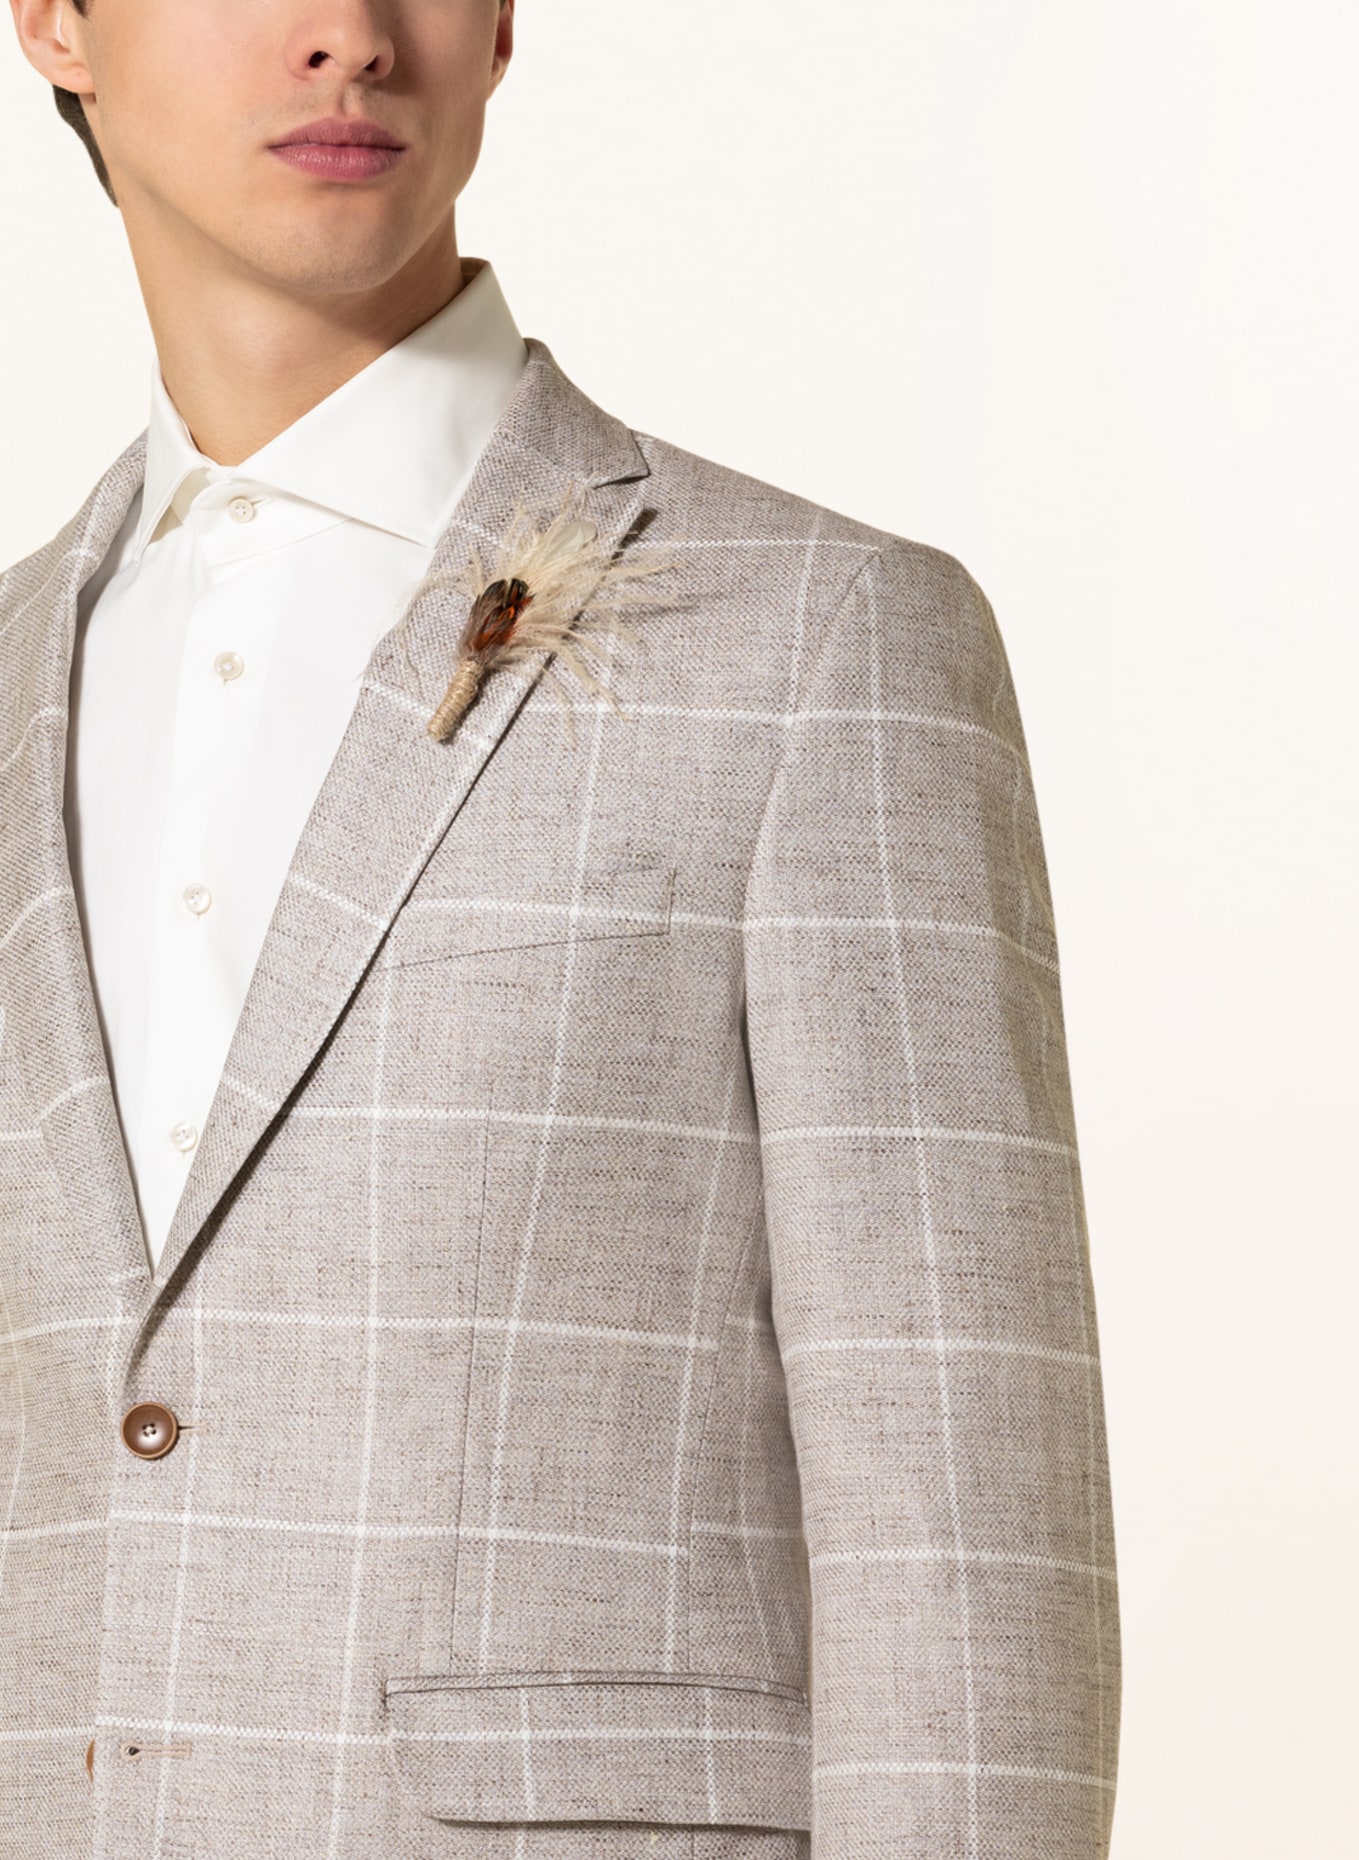 CG - CLUB of GENTS Suit jacket CG PAUL slim fit with linen, Color: 21 beige hell (Image 5)